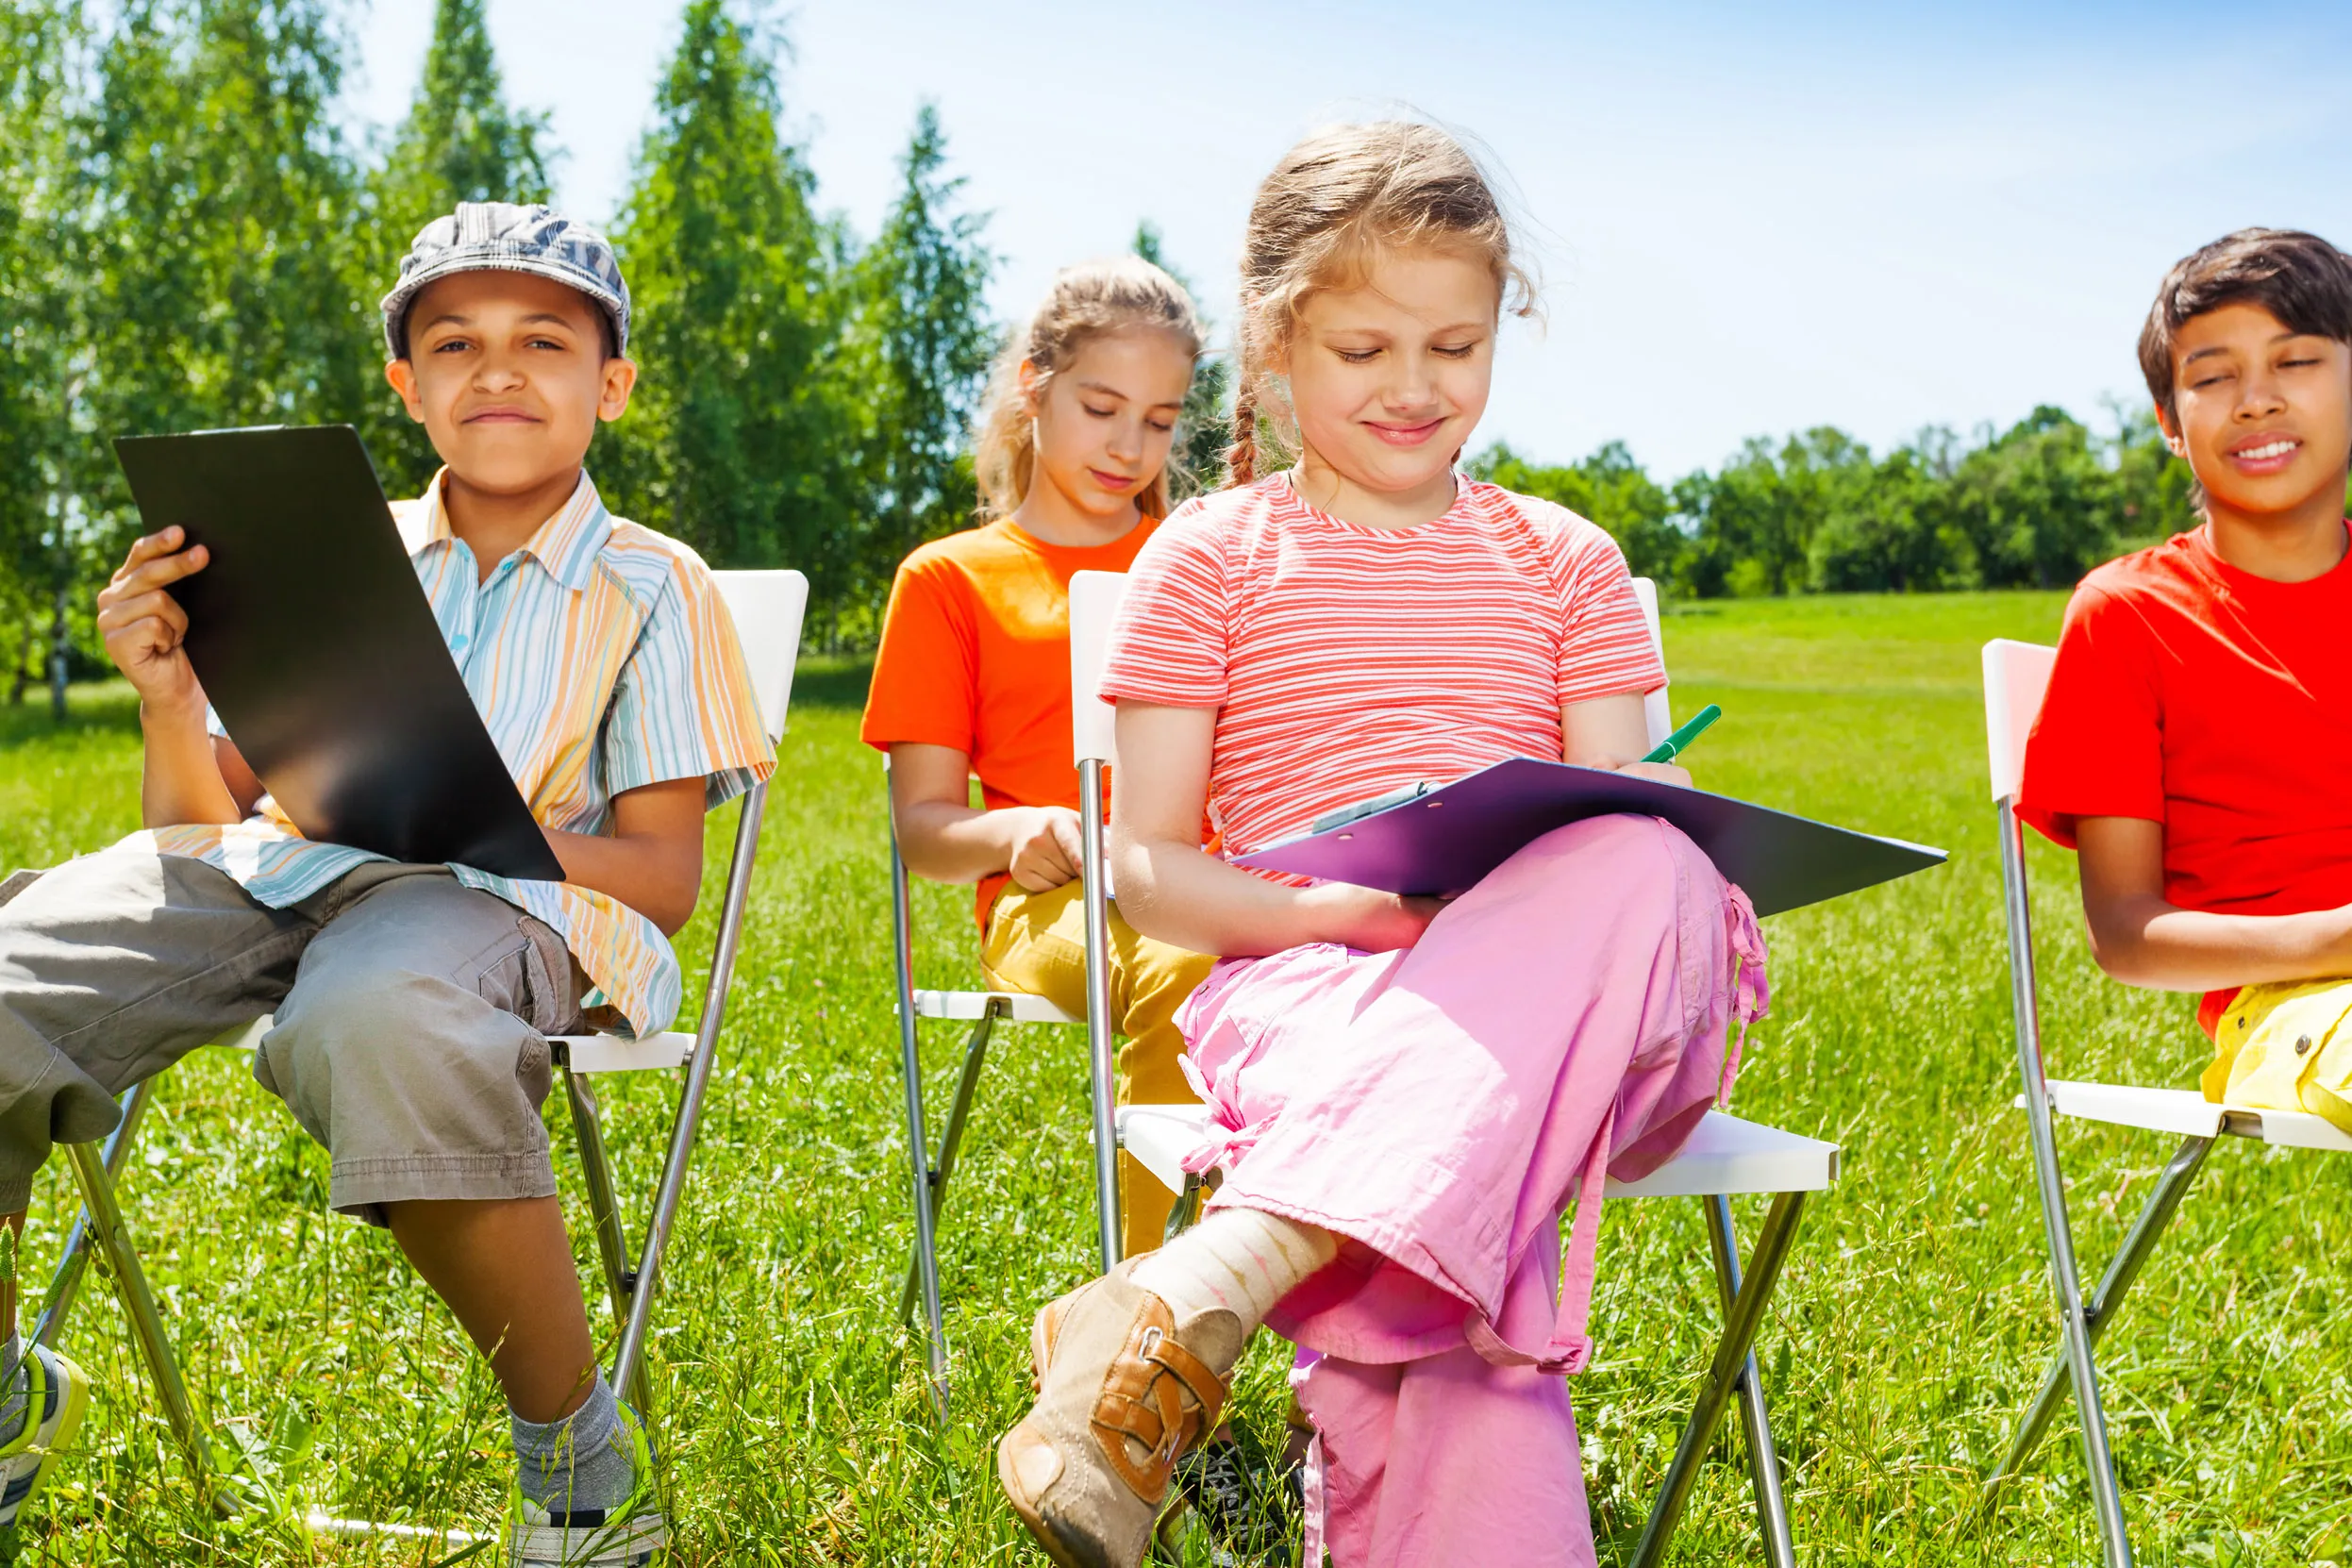 A group of four children sat outside on chairs making notes on clipboards.